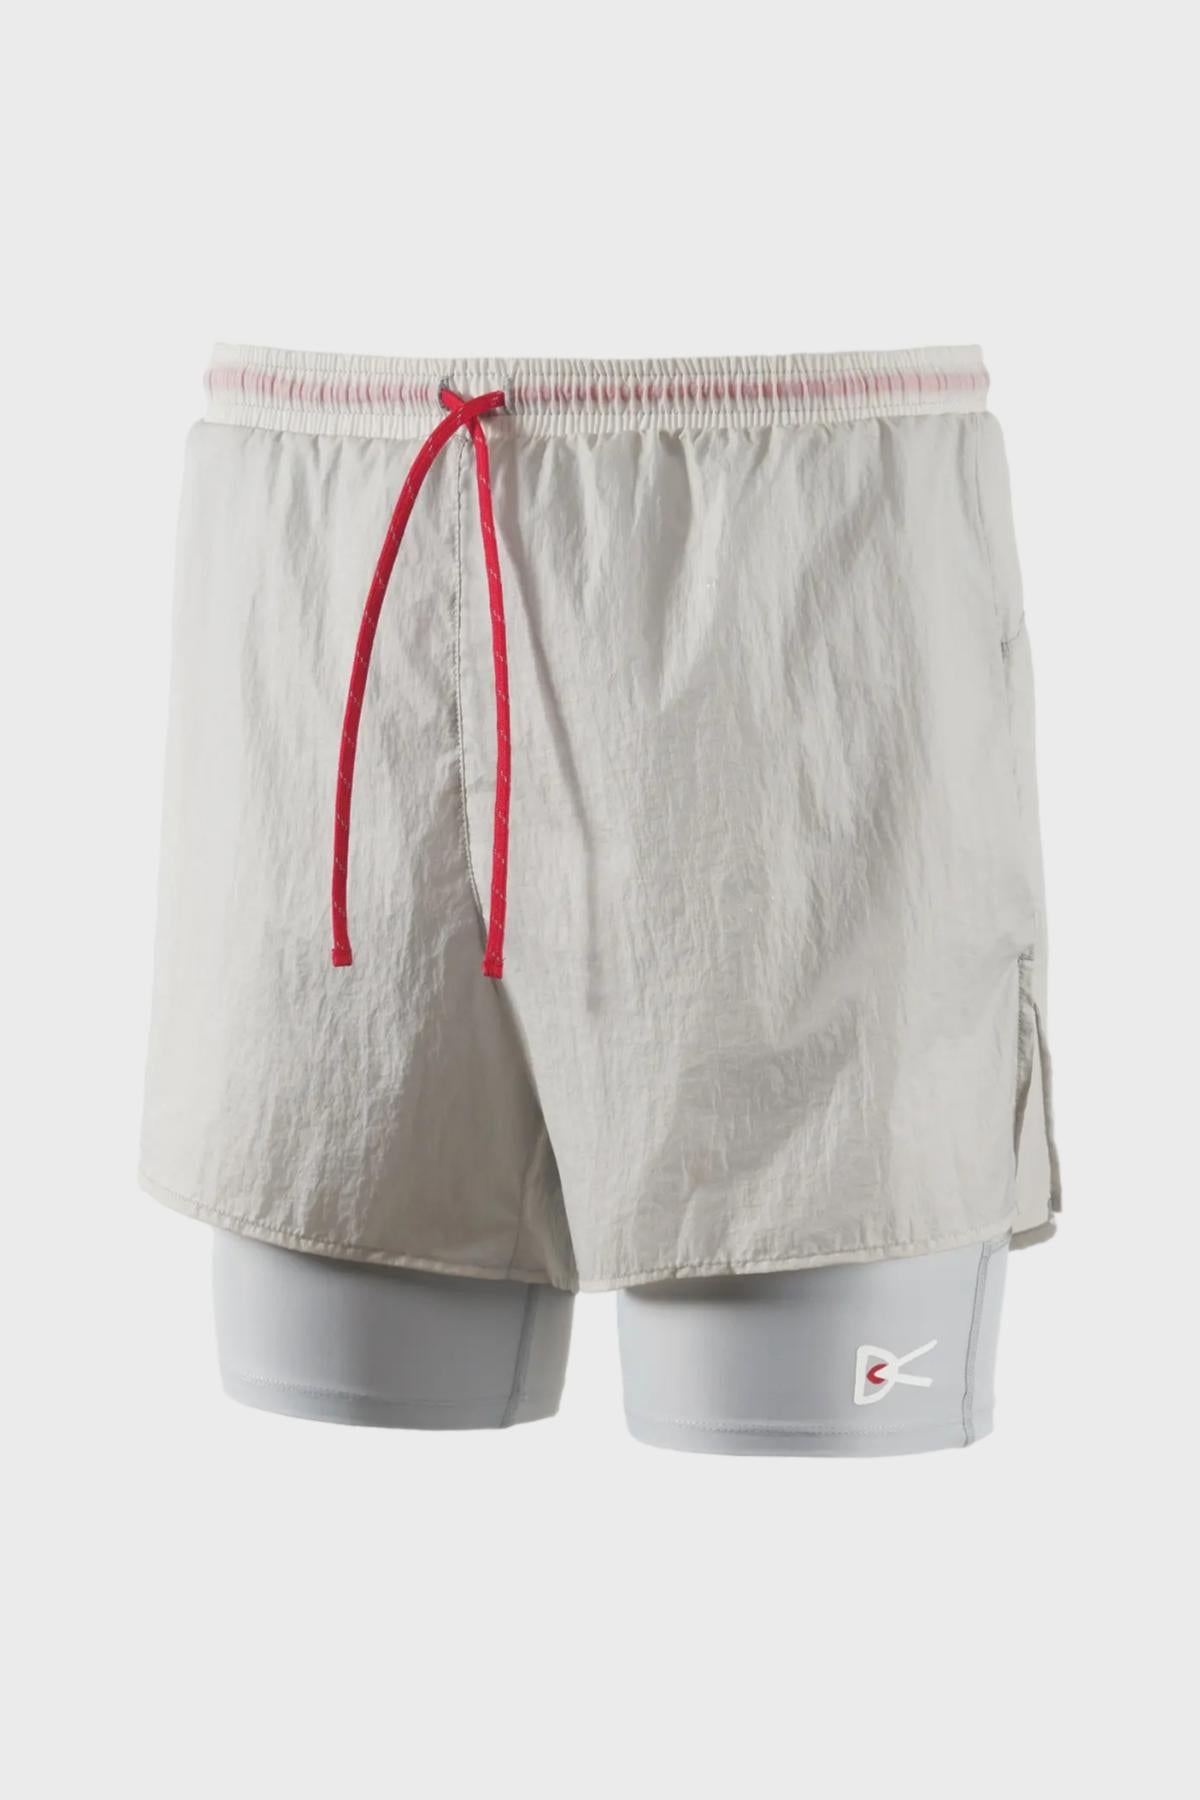 DISTRICT VISION - RIPSTOP LAYERED POCKETED TRAIL SHORTS